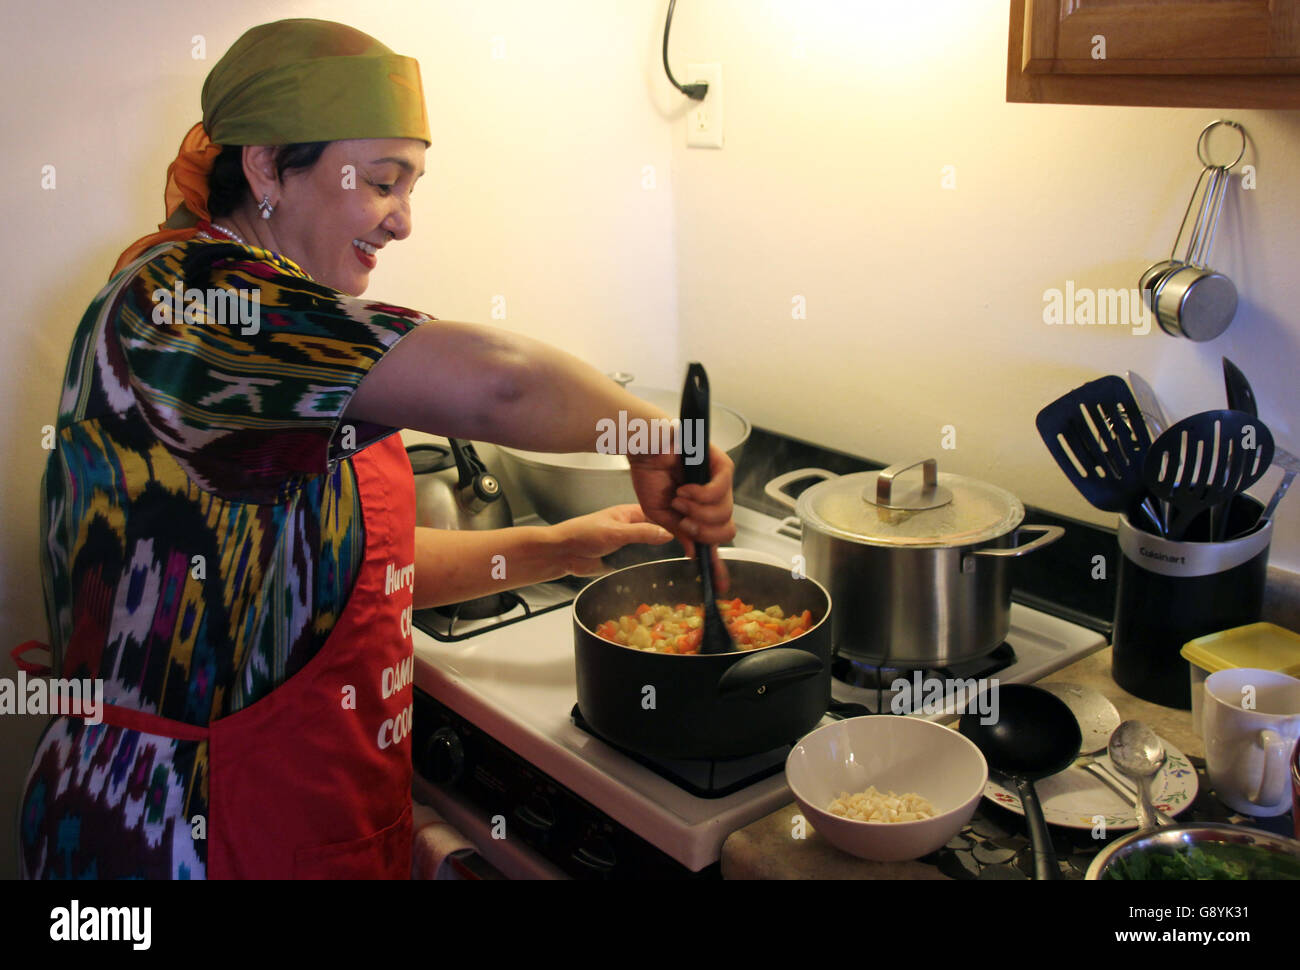 New York, USA. 27th Feb, 2016. Damira Inatullaeva cooks Uzbek Boemjon salad, a type of cooked salad made of eggplants, onions, carrots, dill and corriander, during a cooking class in New York, United States, 27 February 2016. For two months she has worked for the 'League of Kitchens', a cooking school that was praised as the 'UN of kitchens' by the local press. The concept: immigrants introduce a small group of participants to the food and culture of their home country. Photo: Christina Horsten/dpa/Alamy Live News Stock Photo